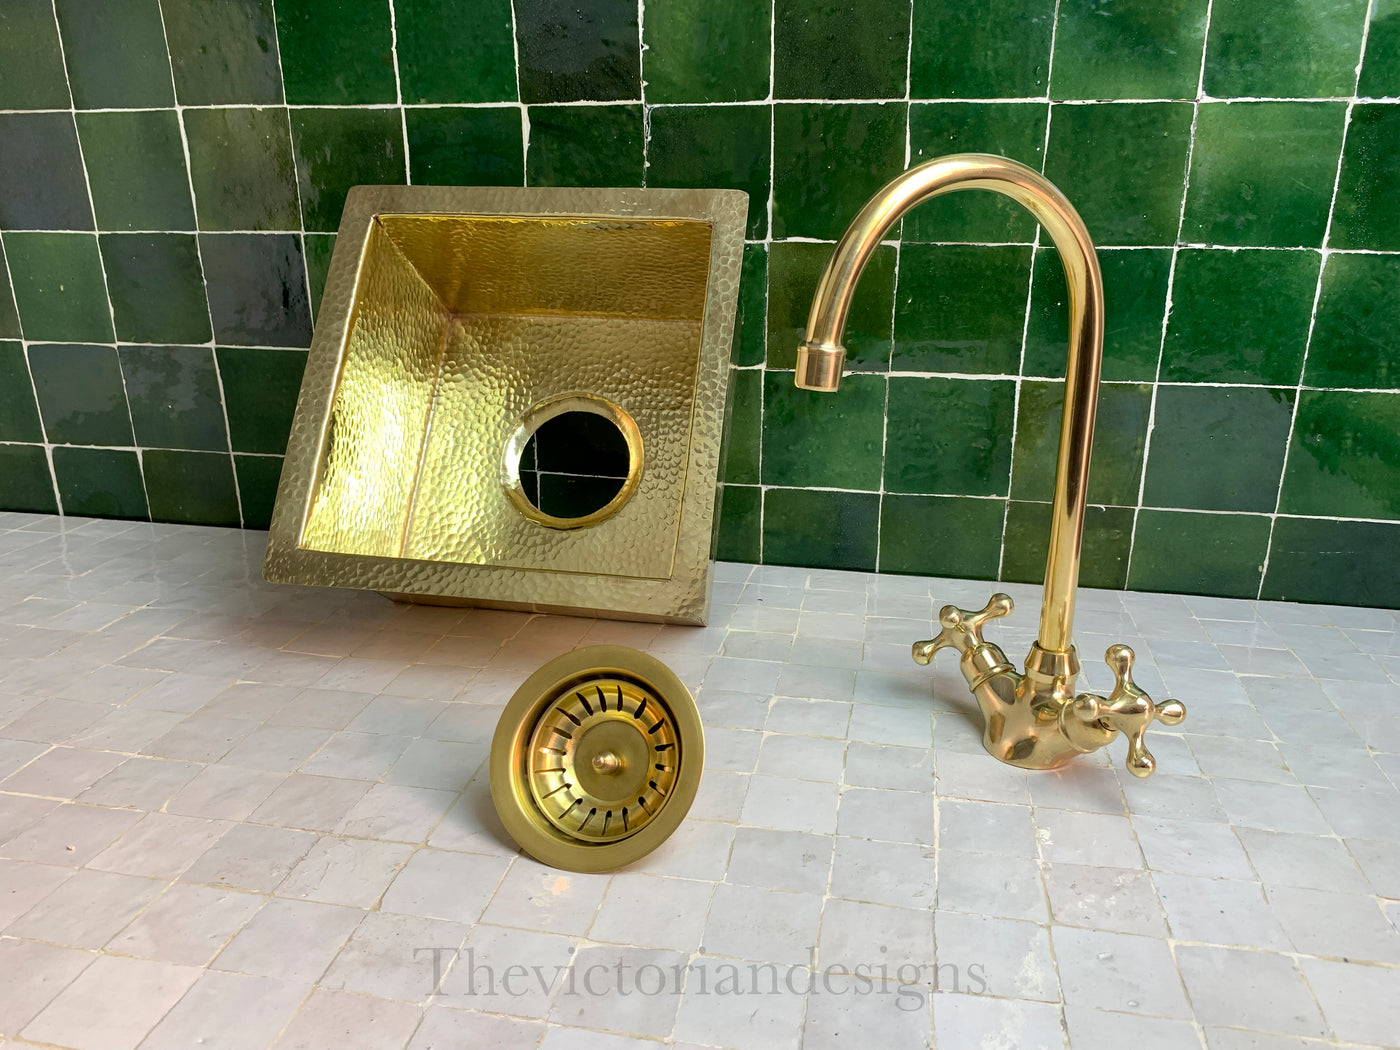 UNLACQUERED BRASS GOOSENECK FAUCET WITH SINK - Triazadesigns